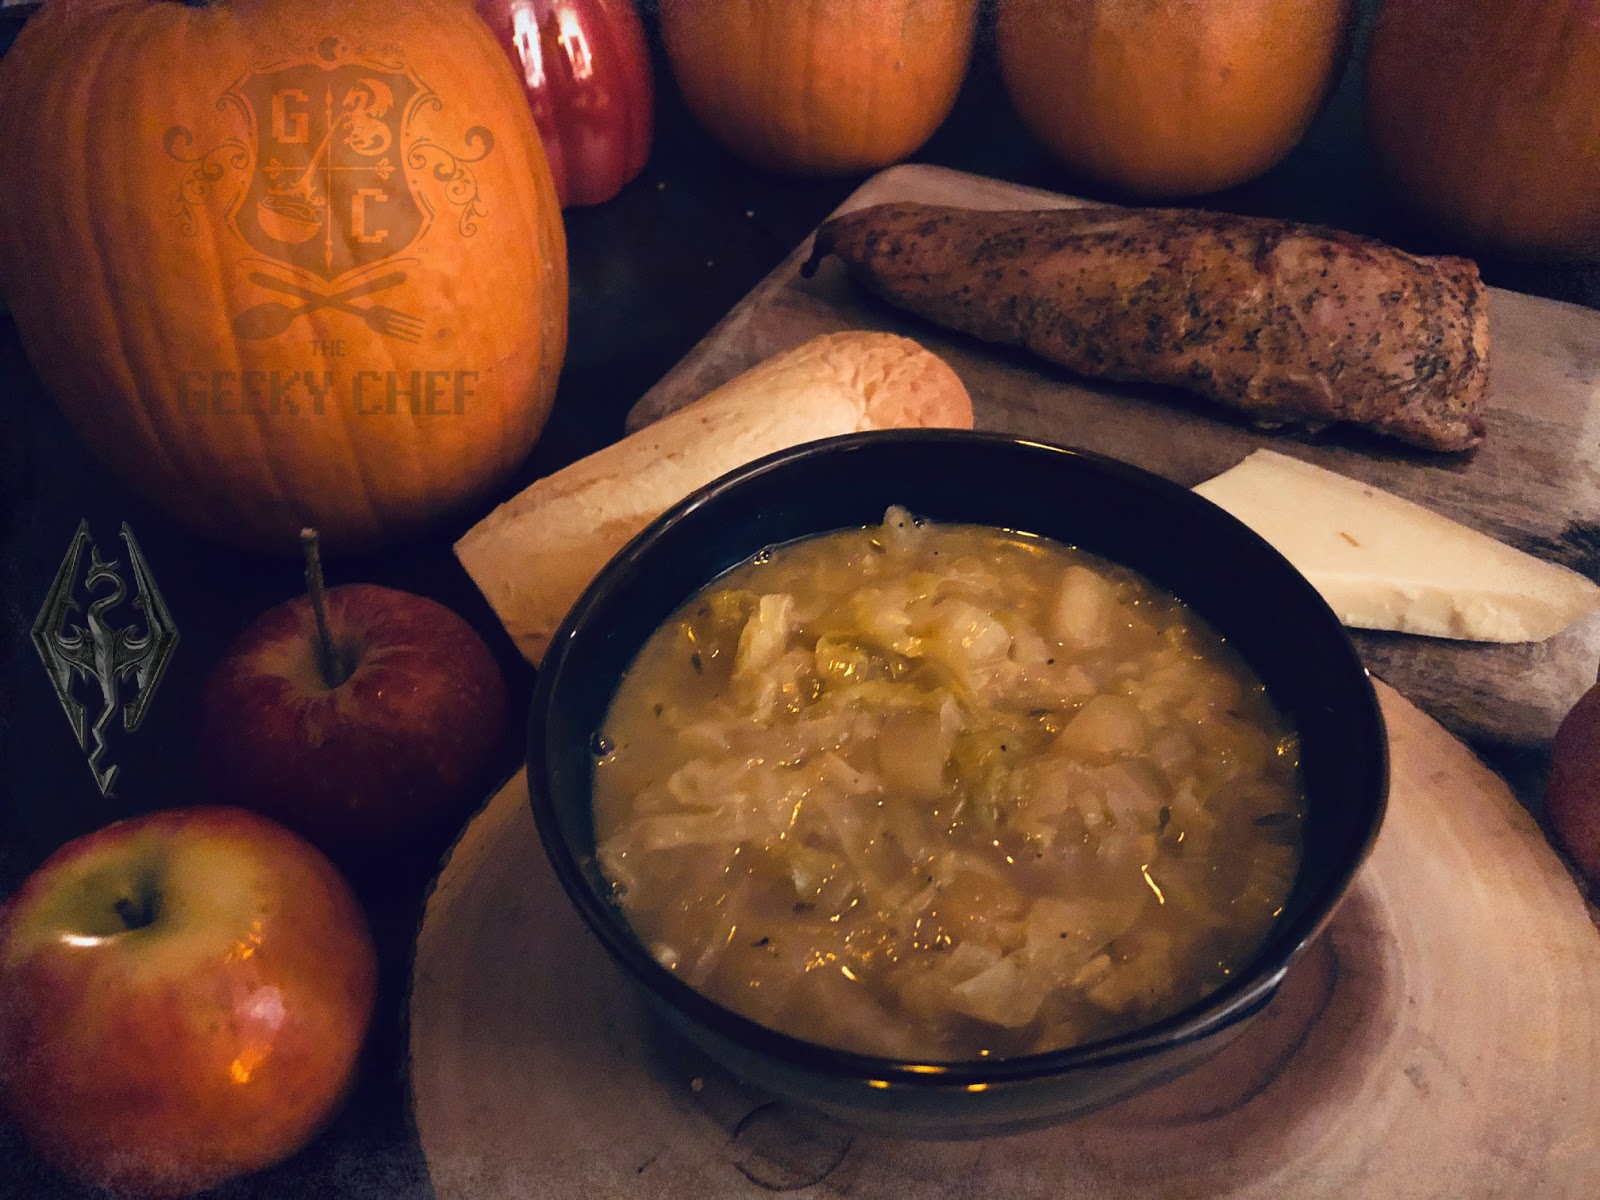 gross video game recipes - Apple Cabbage Stew (Skyrim)